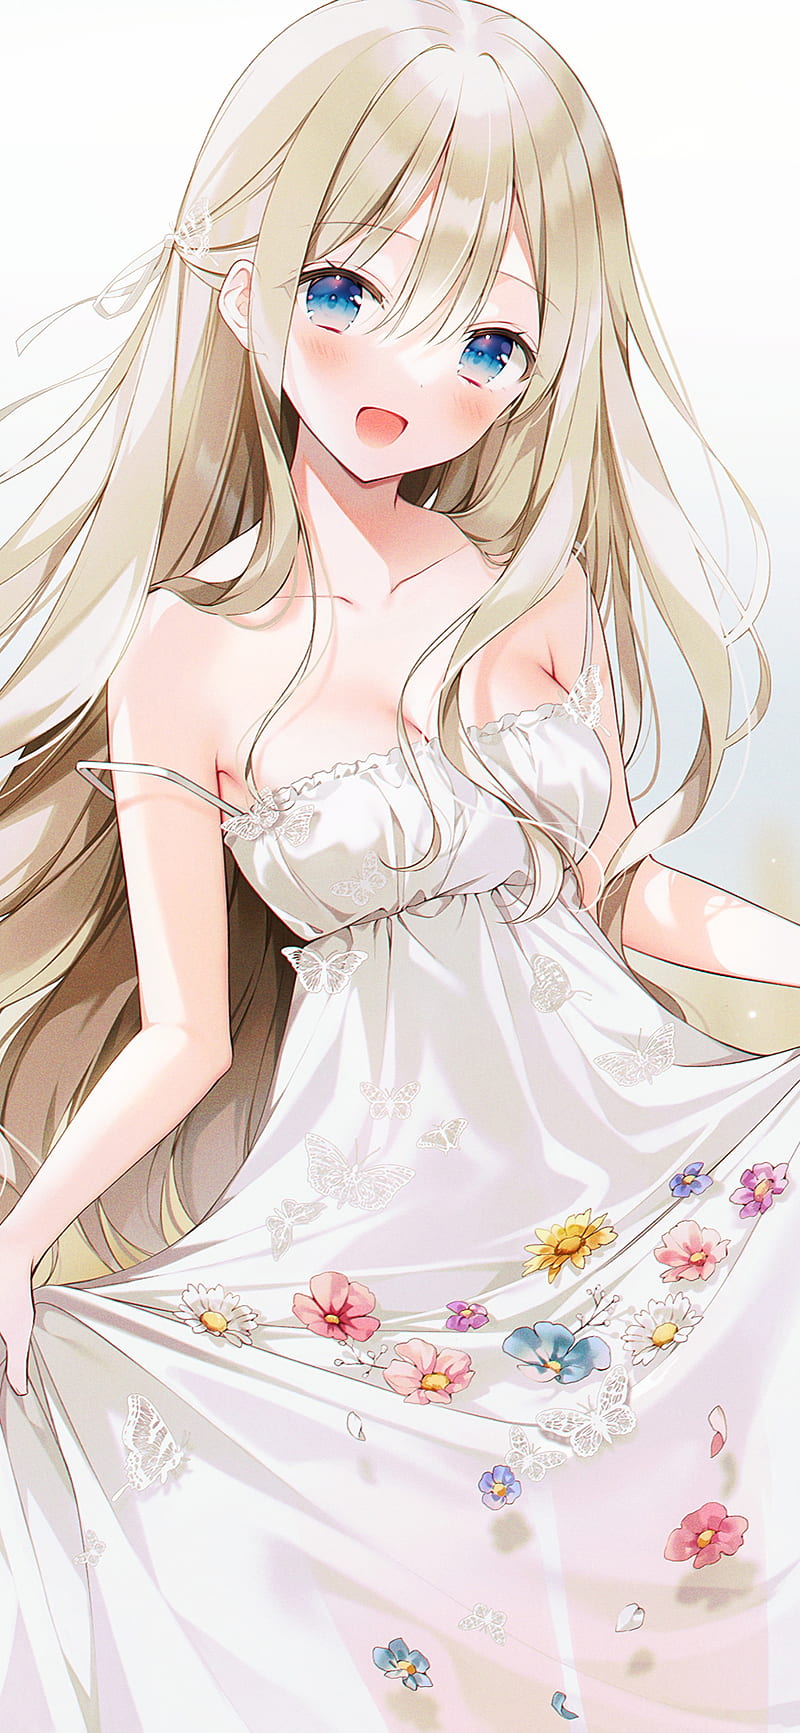 Watchers, blonde female anime character, png | PNGEgg